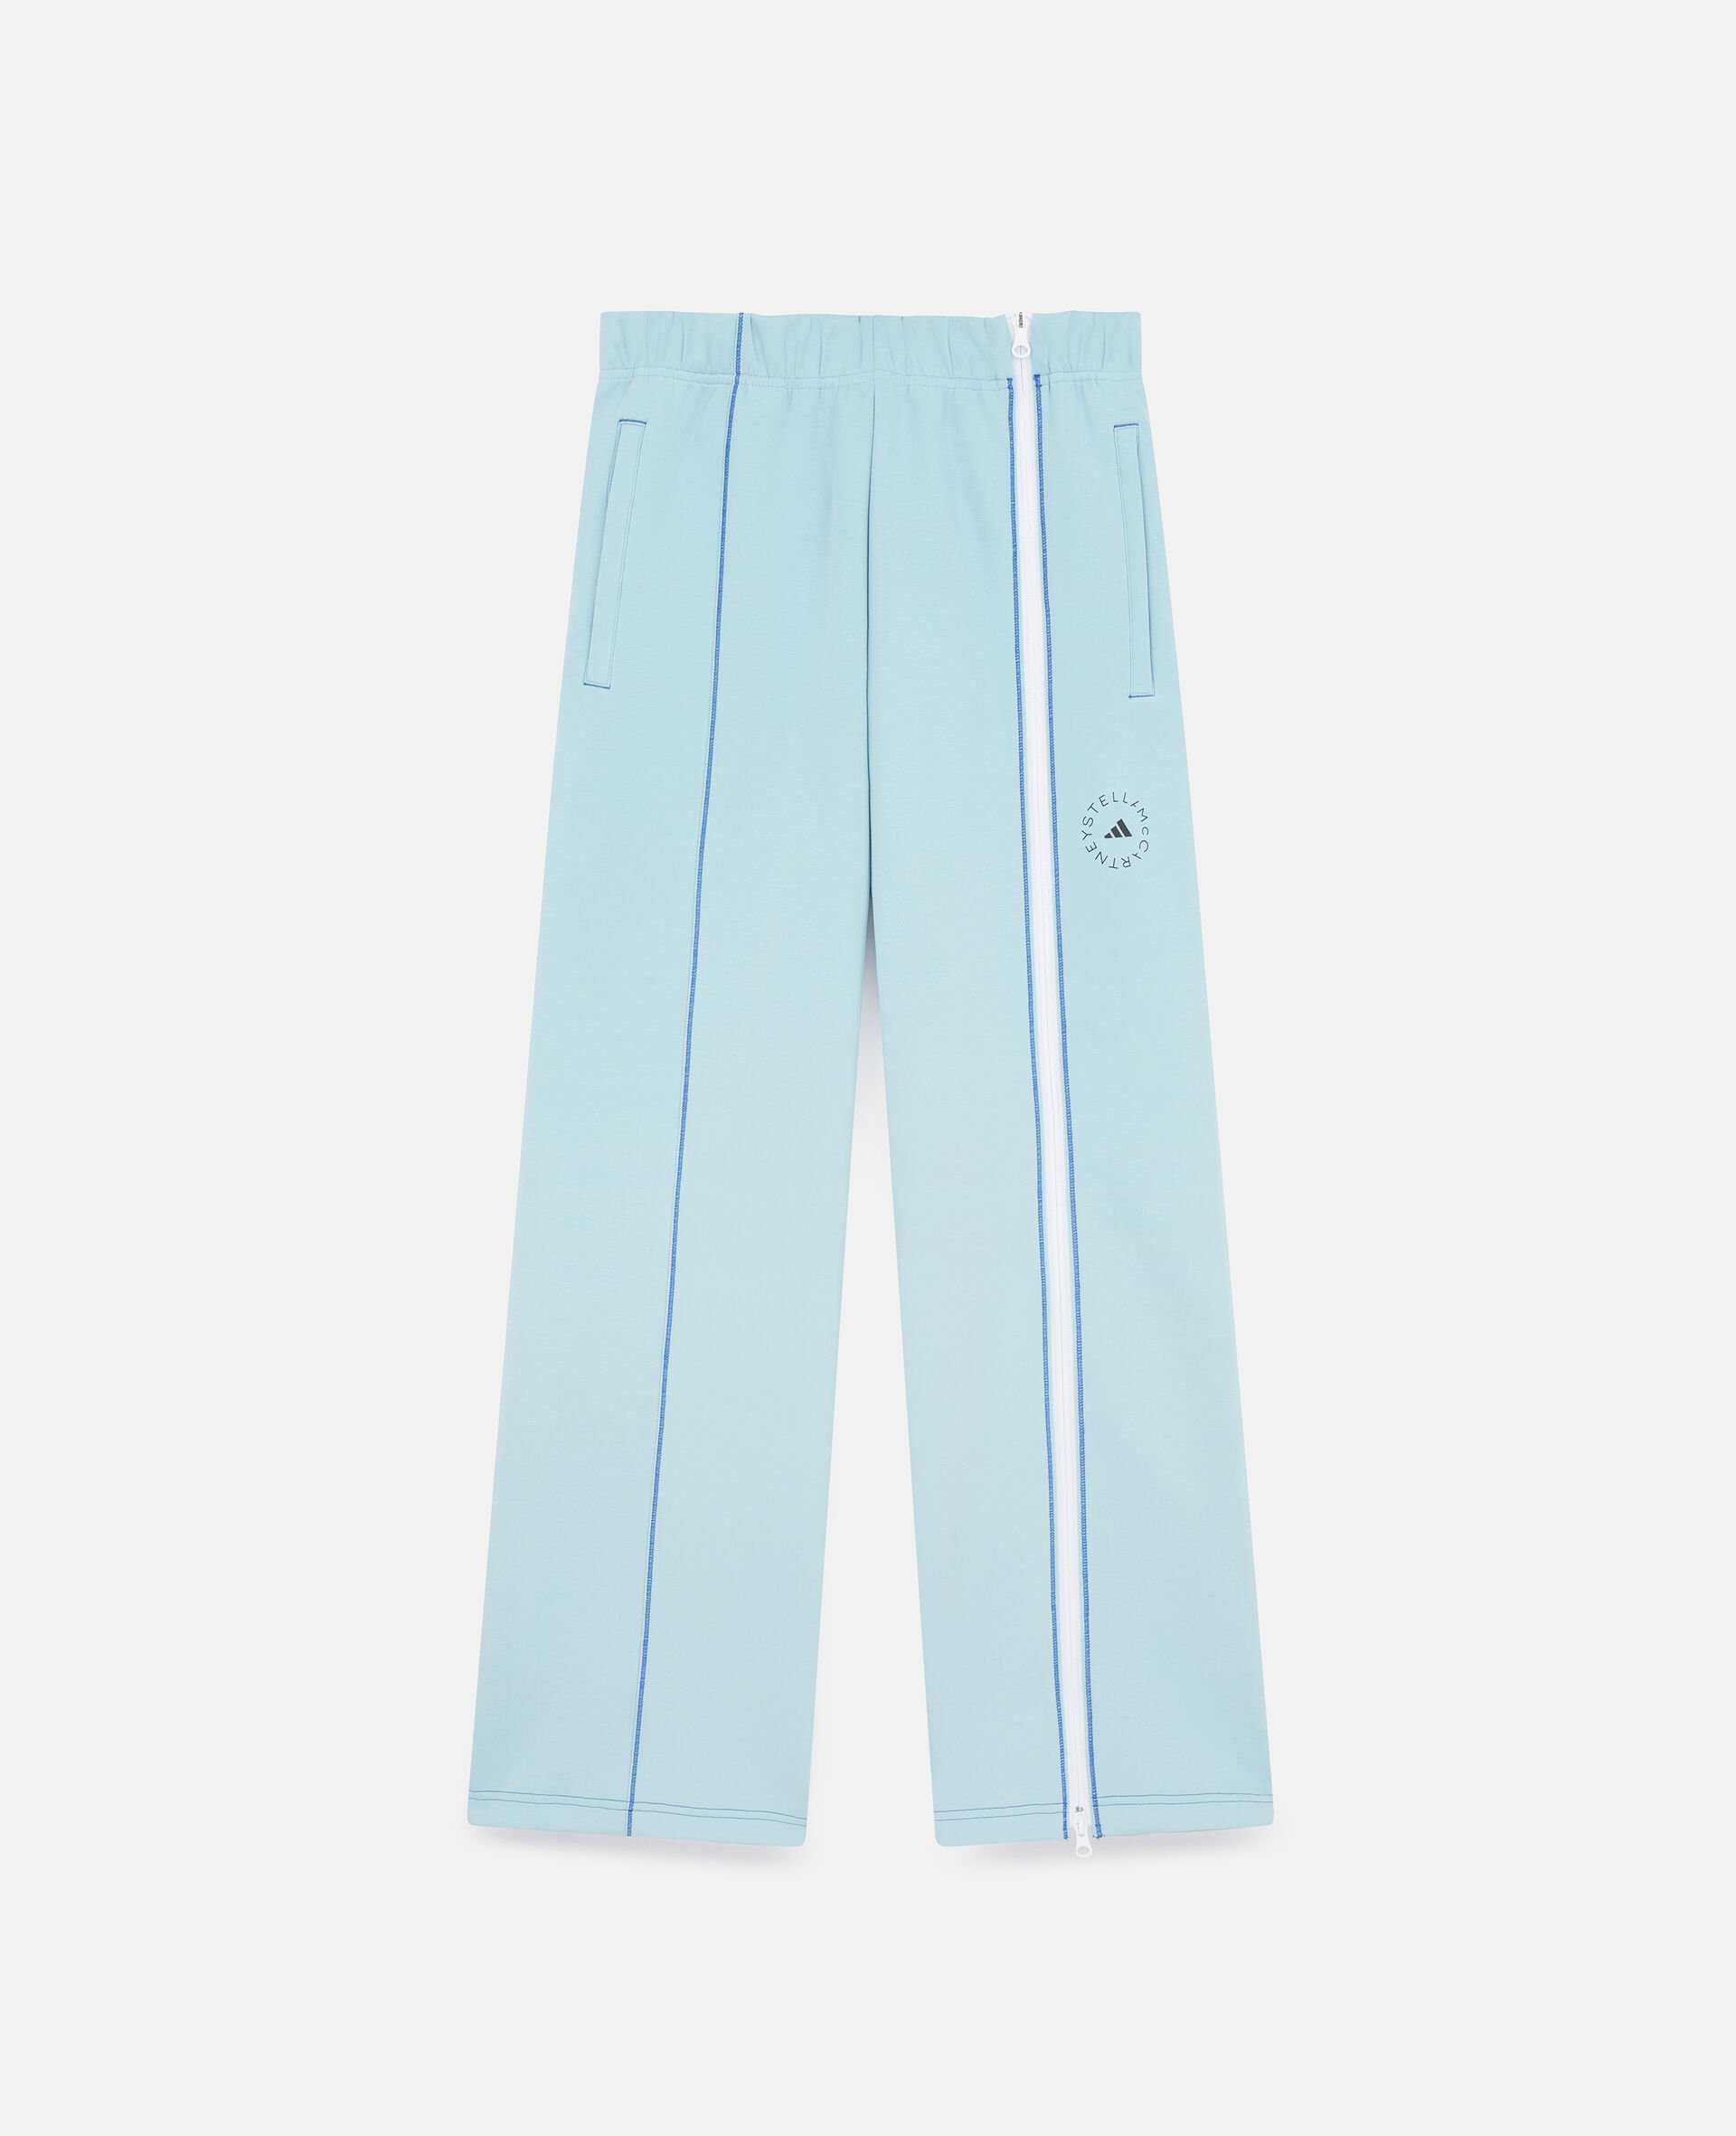 Sportswear Trackpant-Blue-large image number 0